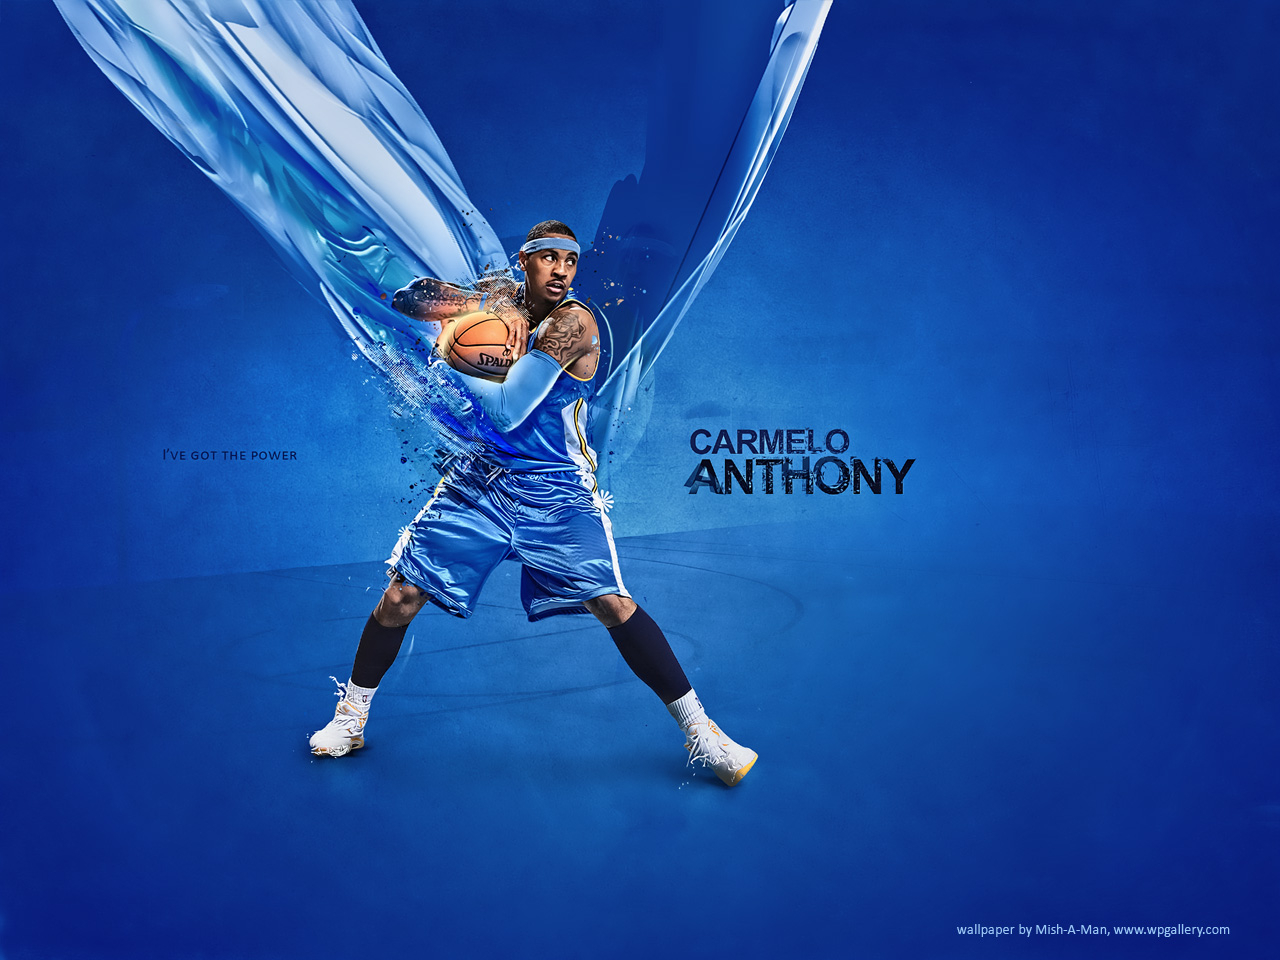 Carmelo Anthony for 1280 x 960 resolution